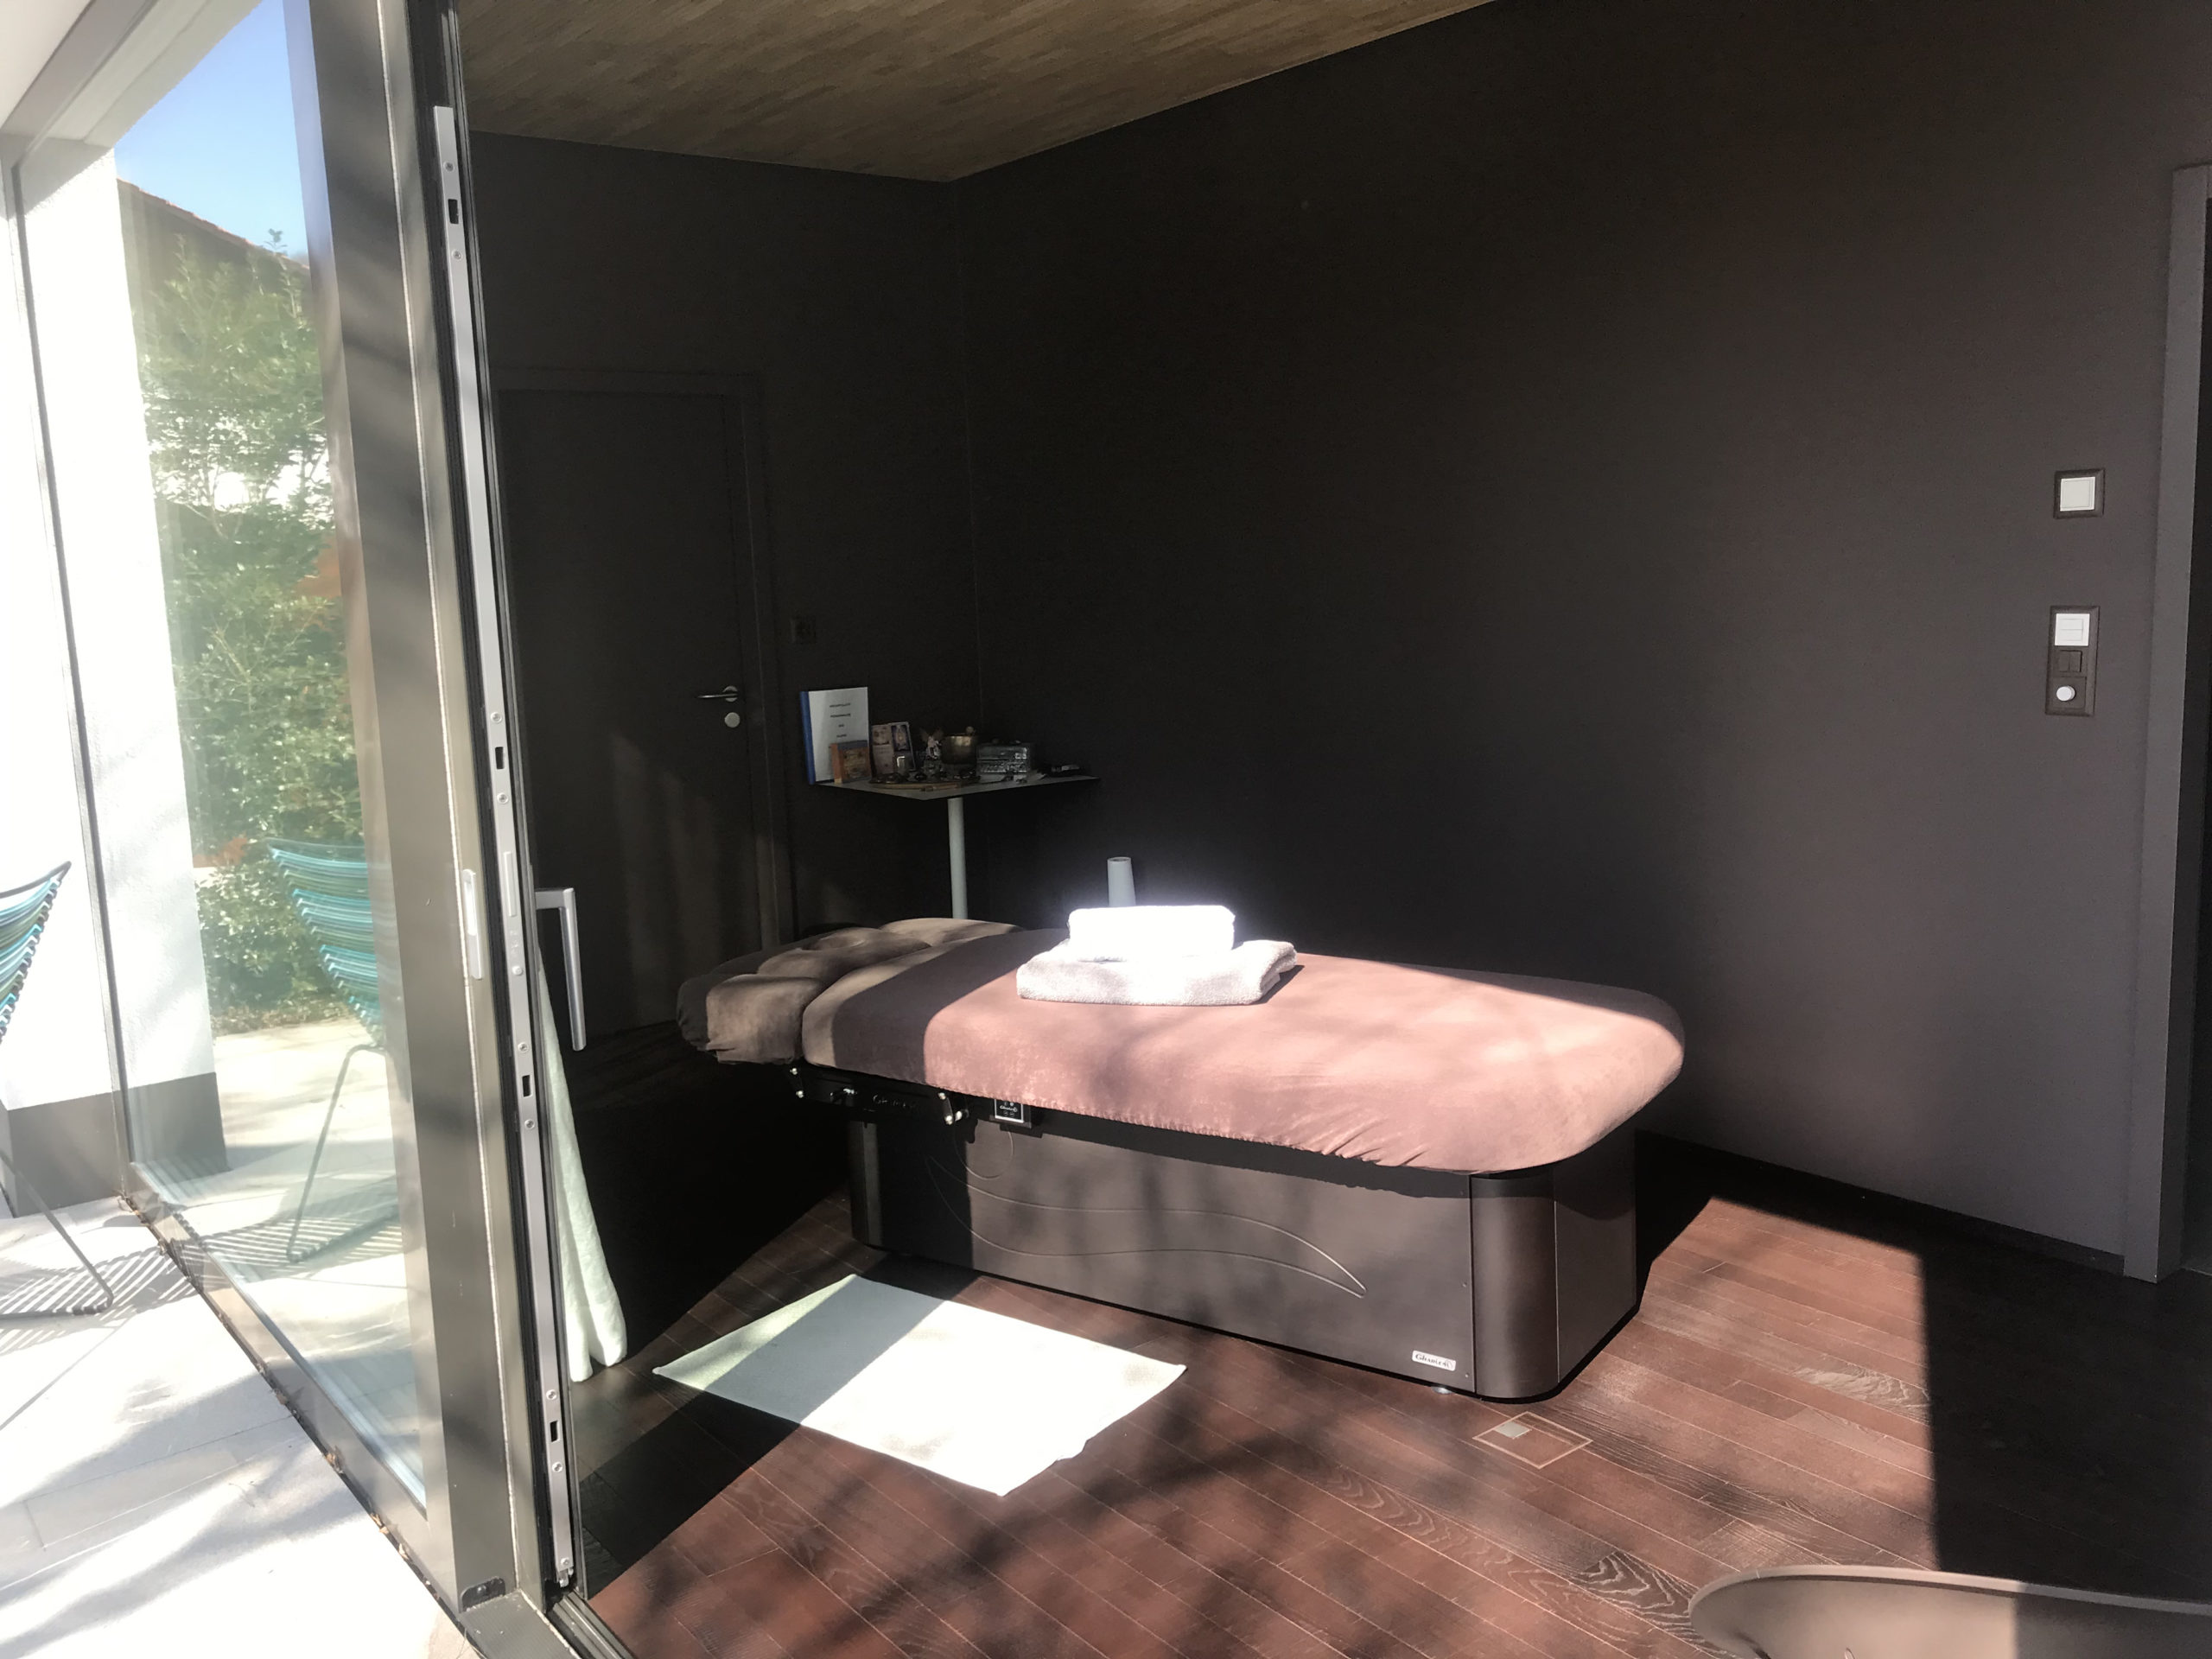 inspiration spa detente soins 37 scaled